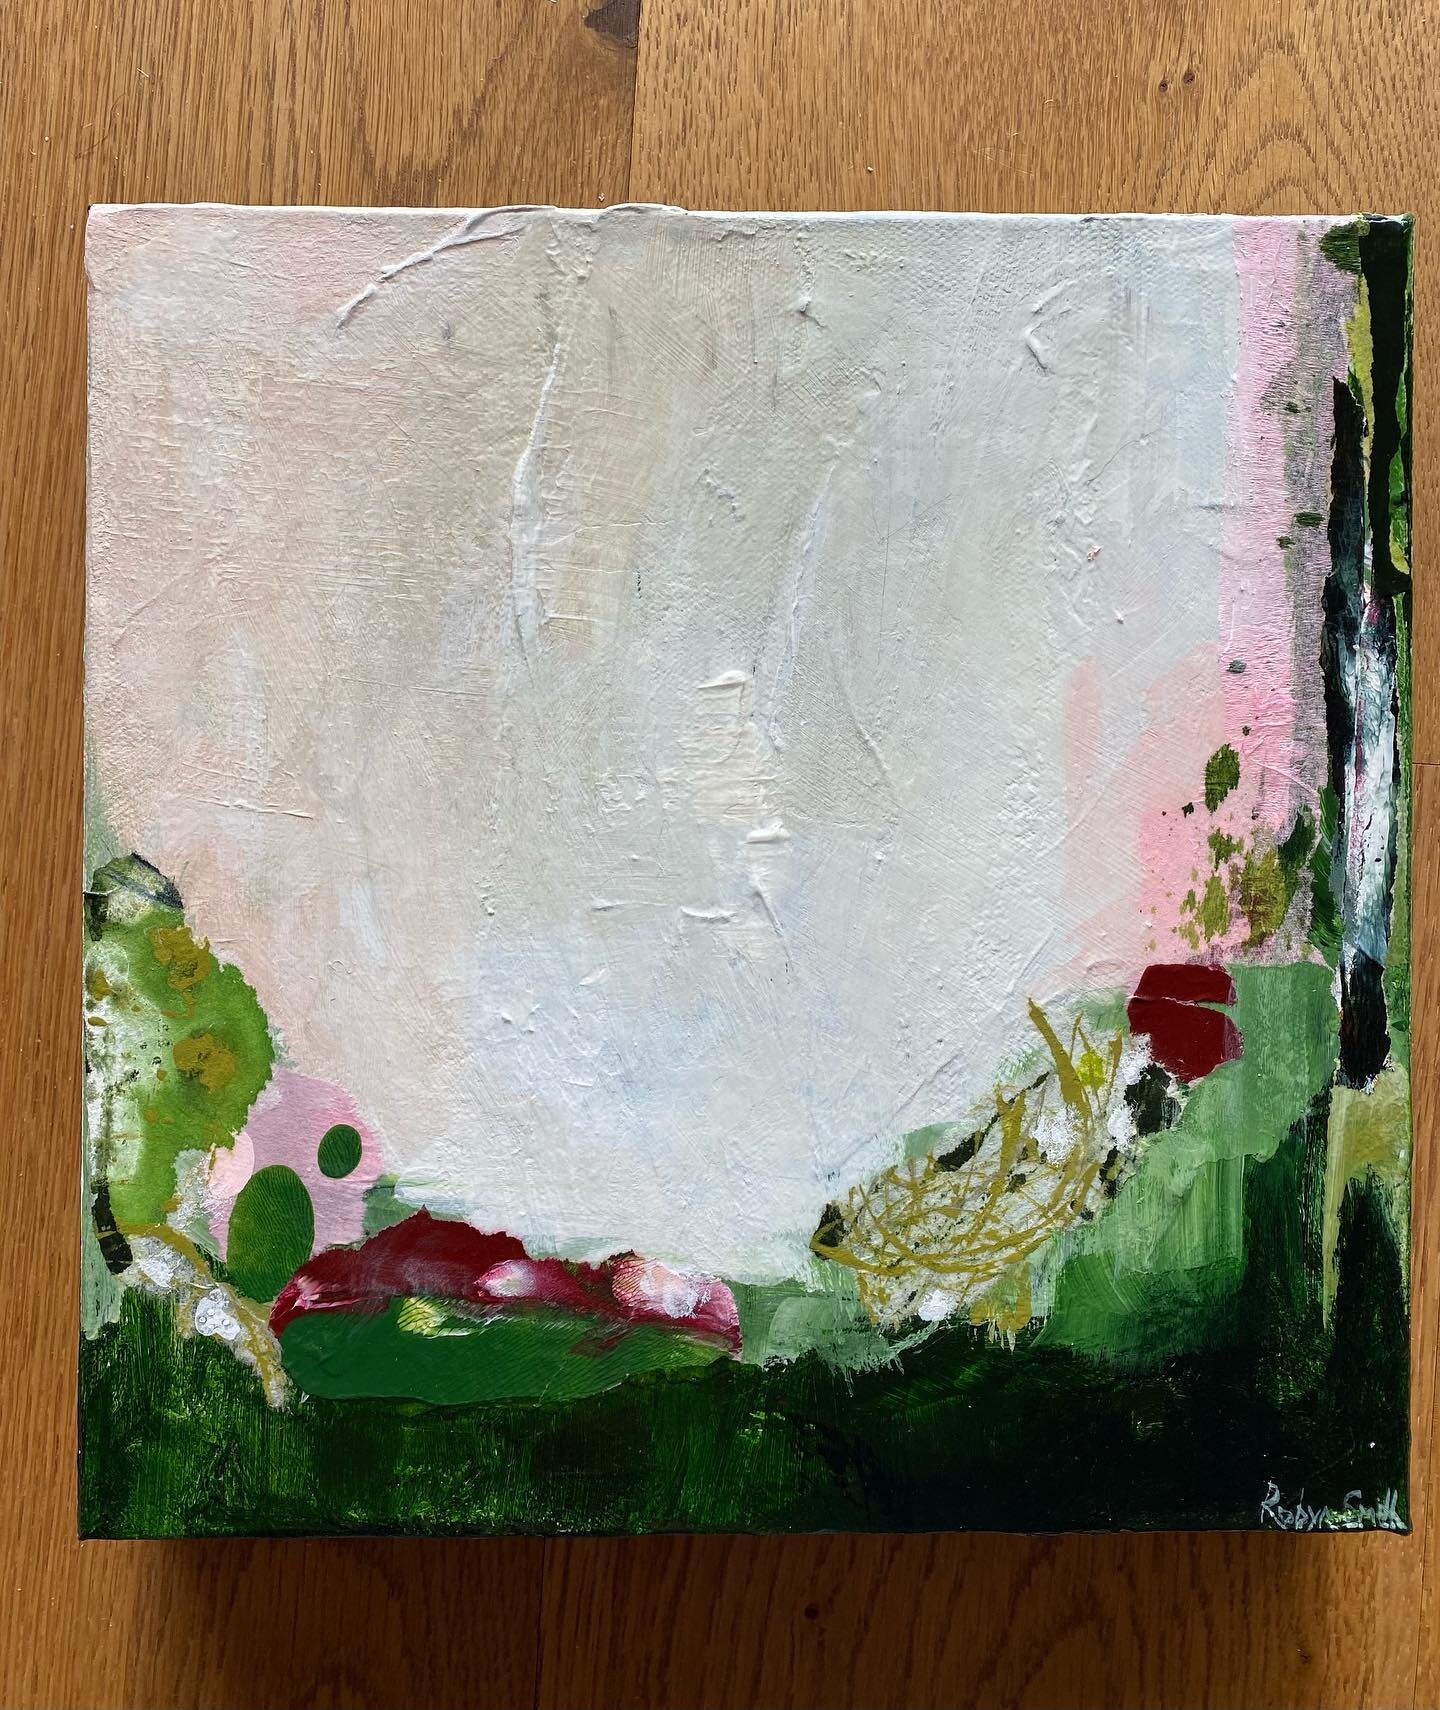 Finished piece. 25x25cm. Just a little one. 😊 #nzart #nzartist #collageart #collageartist #collageartwork #interiordesign #interiorstyling #interiordecor #abstractart #abstractlandscapepainting #abstractlandscapes